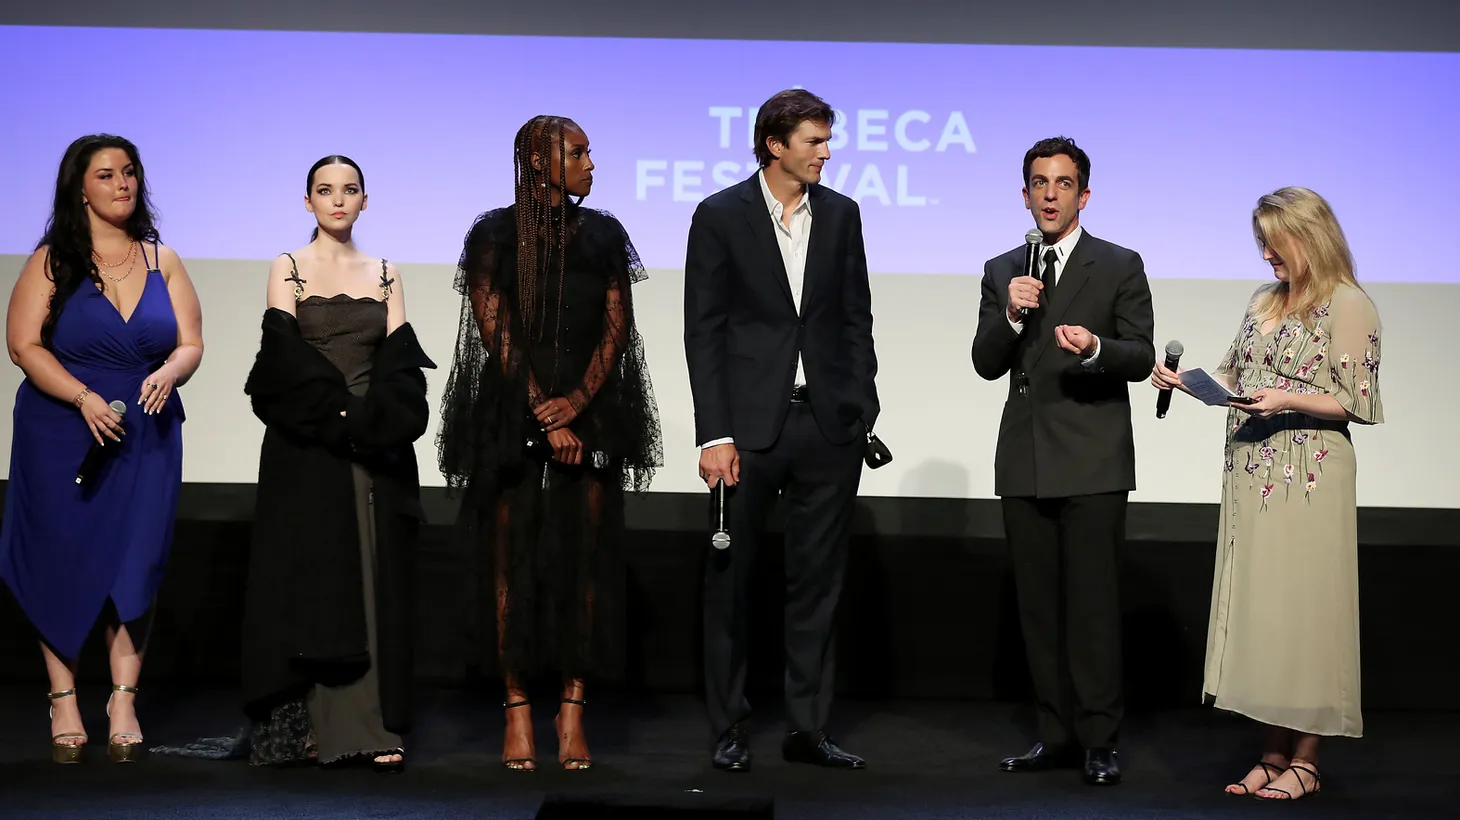 “To me, directing is the same as writing,” says B.J. Novak, director of “Vengeance.” From the left: Isabella Amara, Dove Cameron, Issa Rae, Ashton Kutcher, Novak, and Moderator Cara Cusumano at the “Vengeance” Premiere, at the Tribeca Festival in New York on June 12 2022.